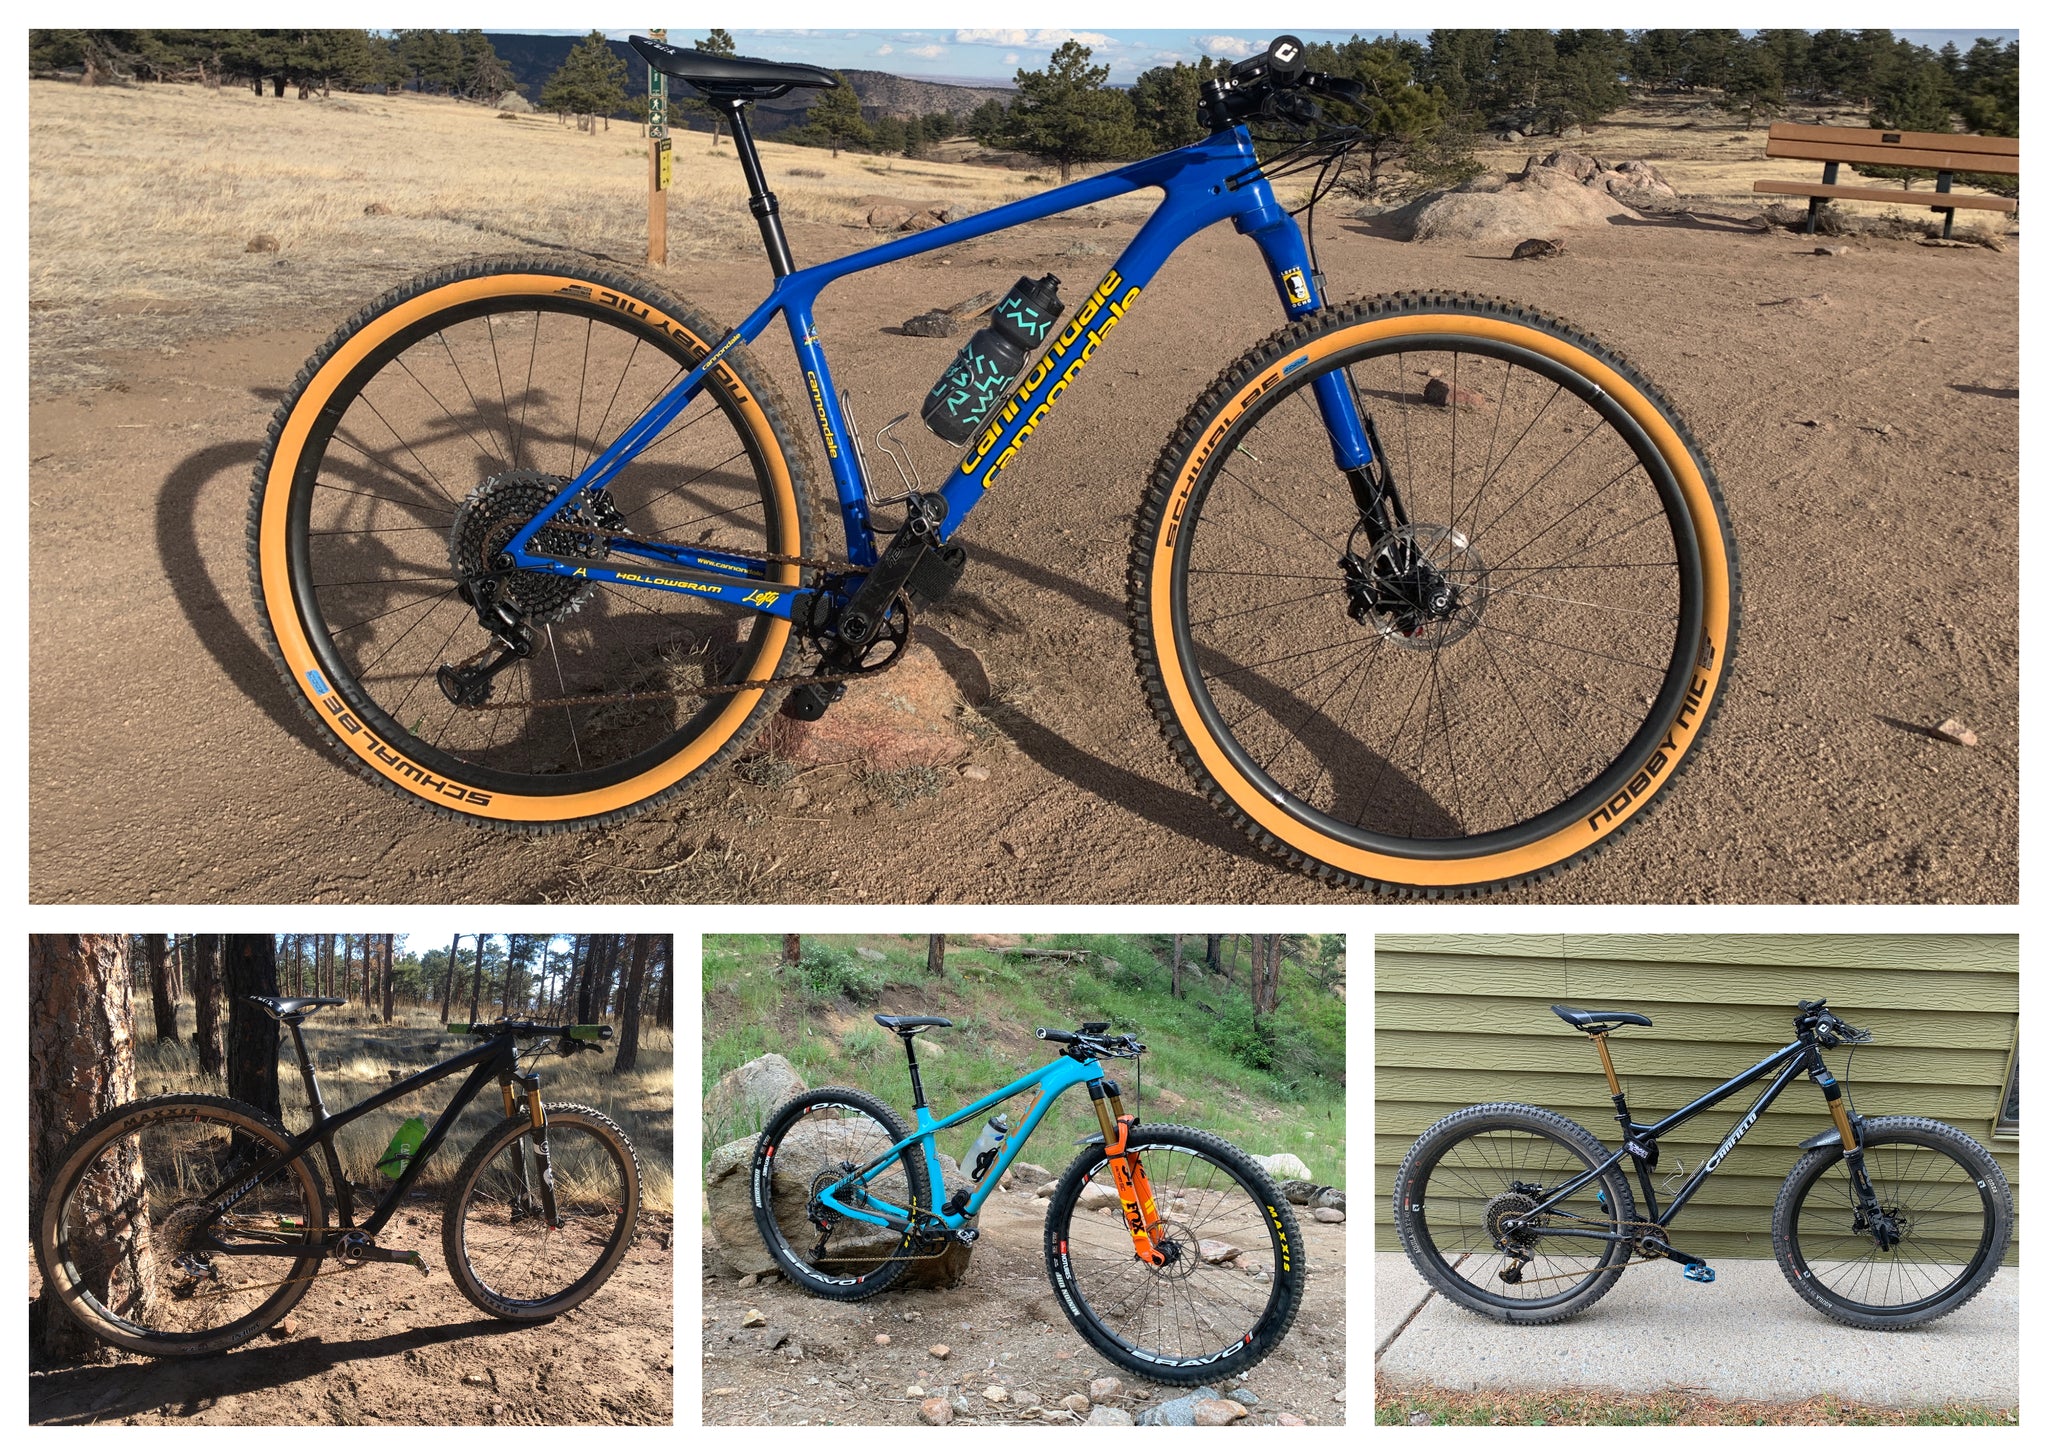 Cannondale F-si, Niner Air9, Kona honzo carbon, Canfield nimble 9